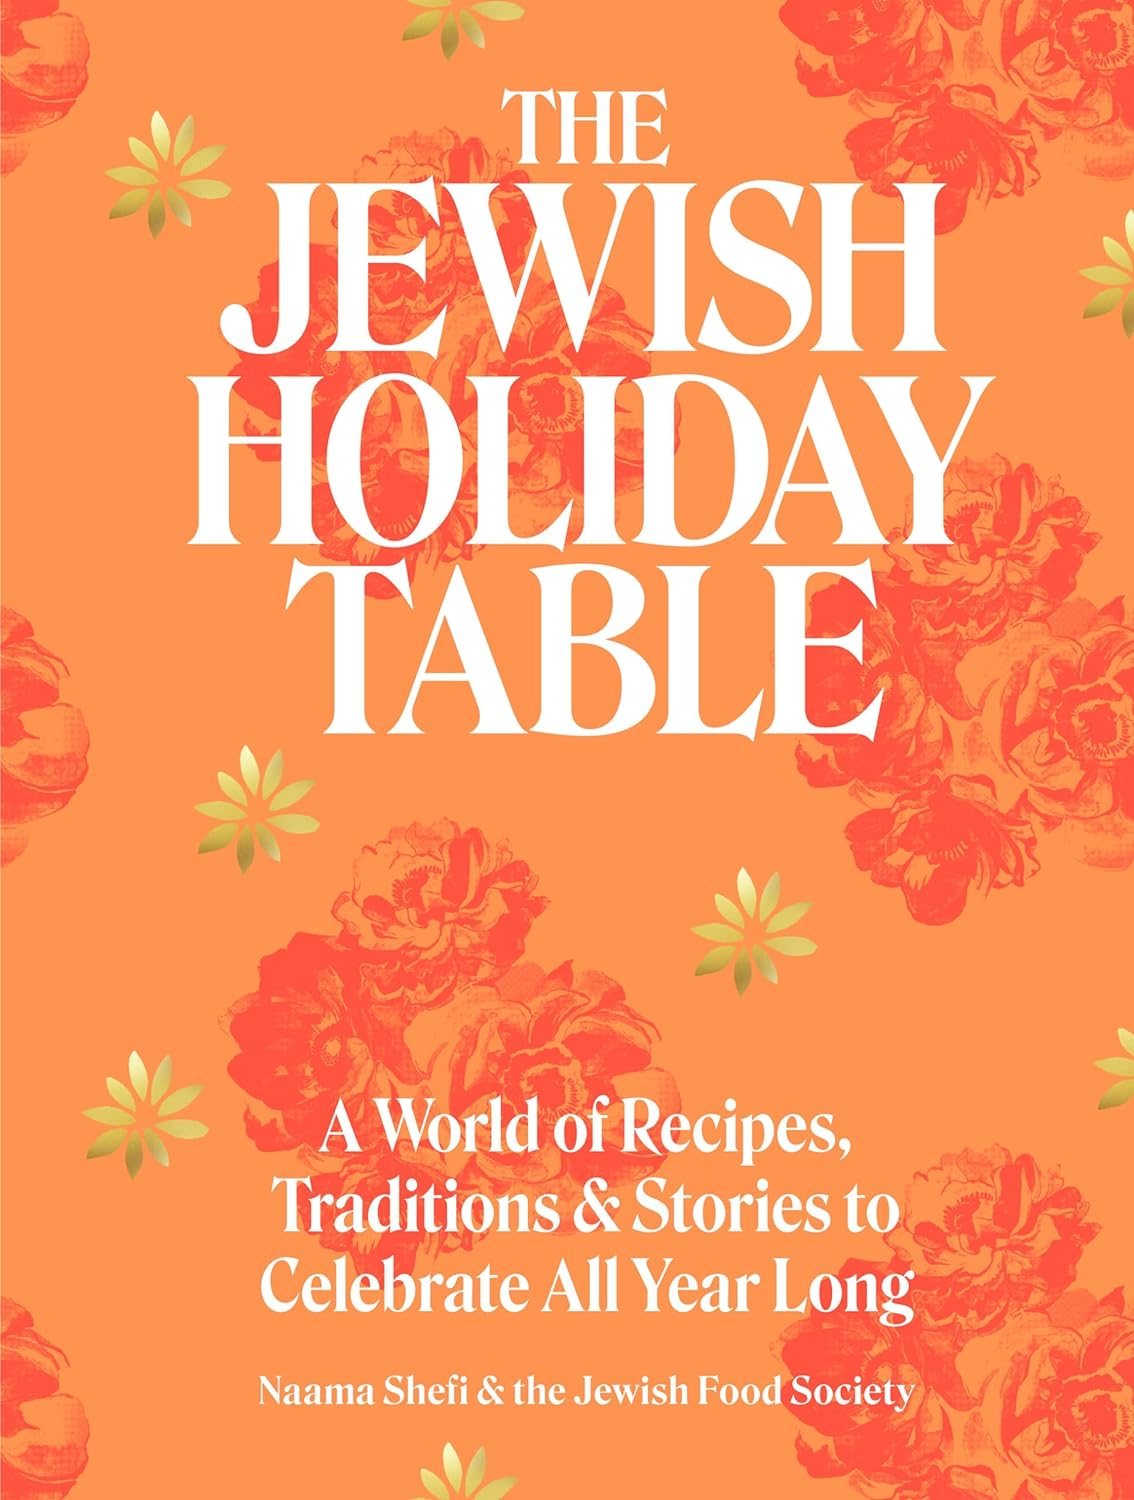 The Jewish Holiday Table: A World of Recipes, Traditions & Stories to Celebrate All Year Long (Naama Shefi and Devra Ferst)